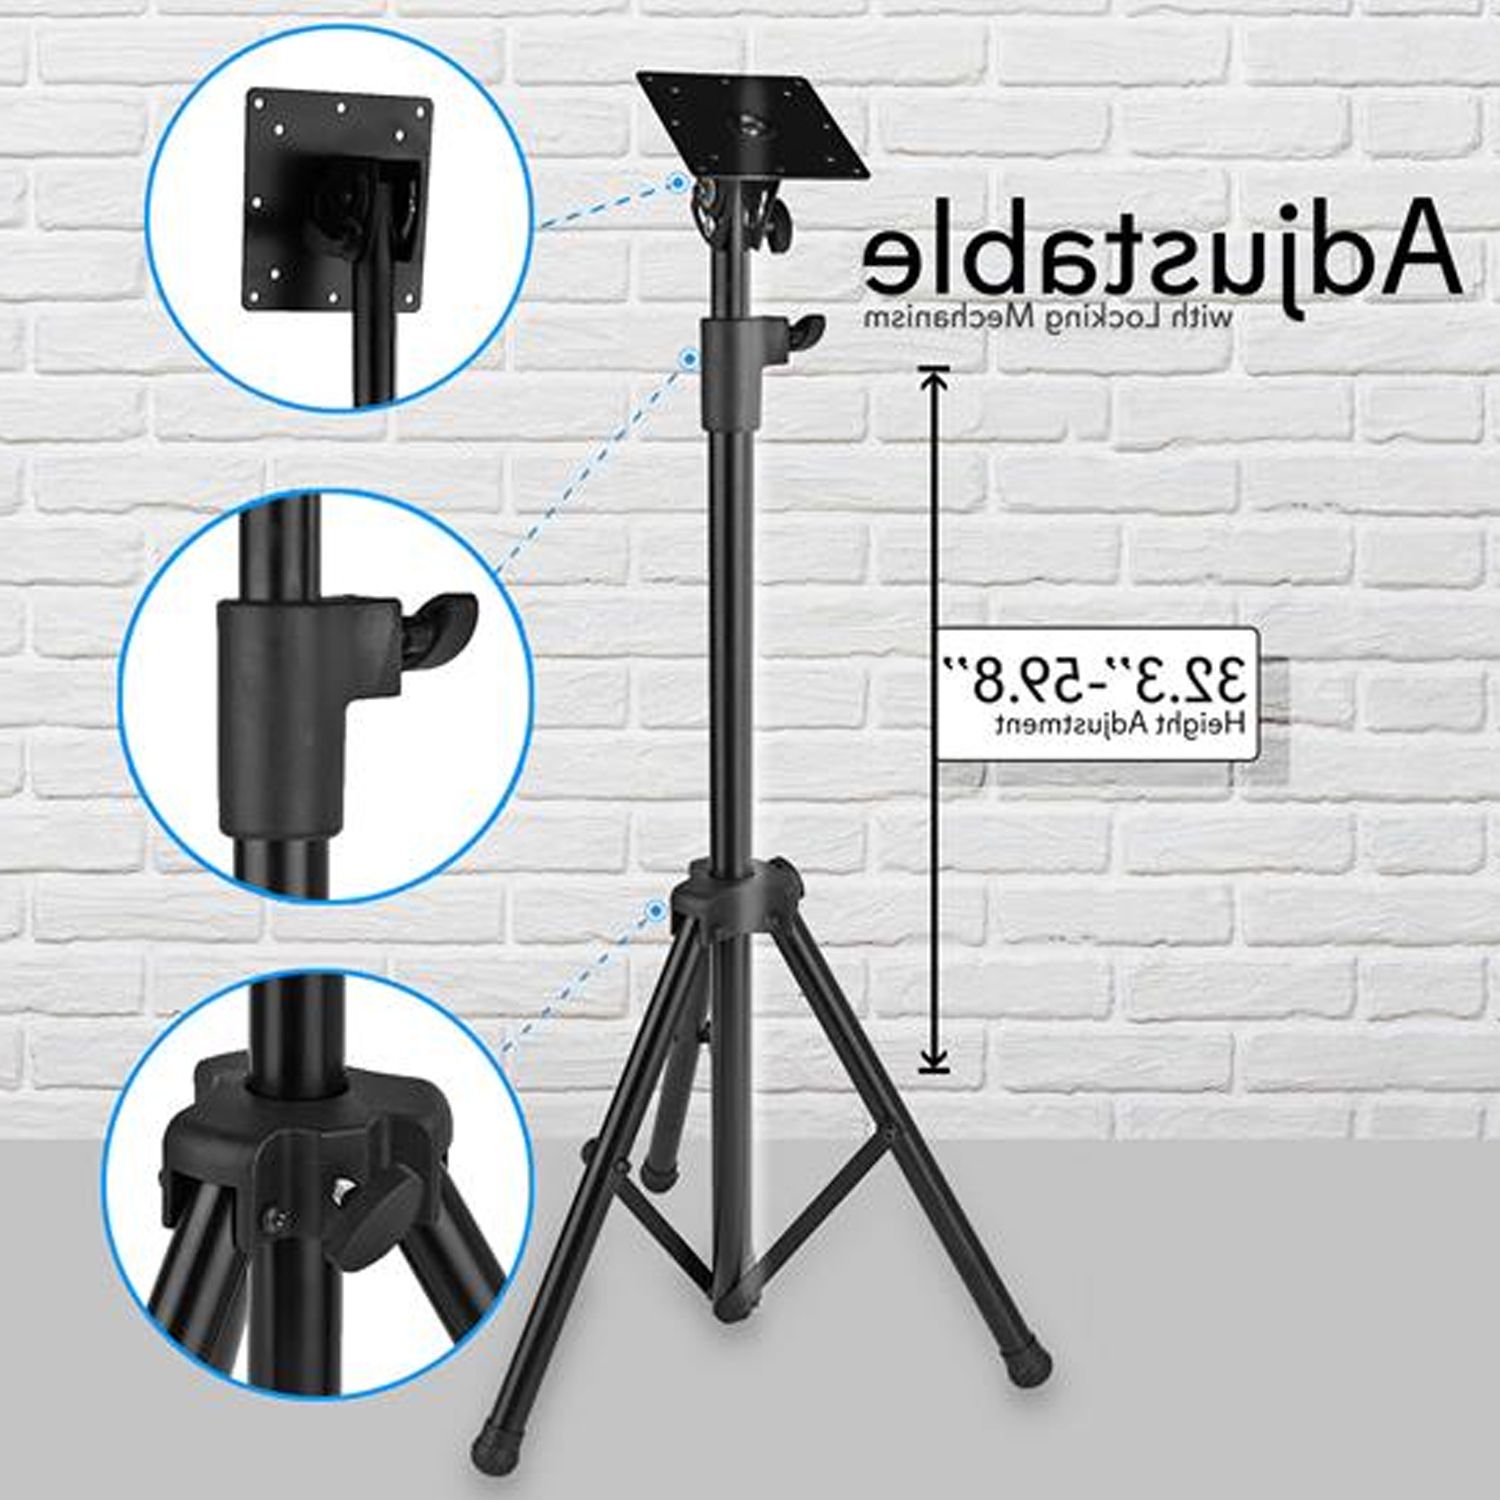 Current Foldable Portable Adjustable Tv Stands Within Pyle Foldable Portable Adjustable Height Steel Tripod Flatscreen Tv (View 3 of 15)